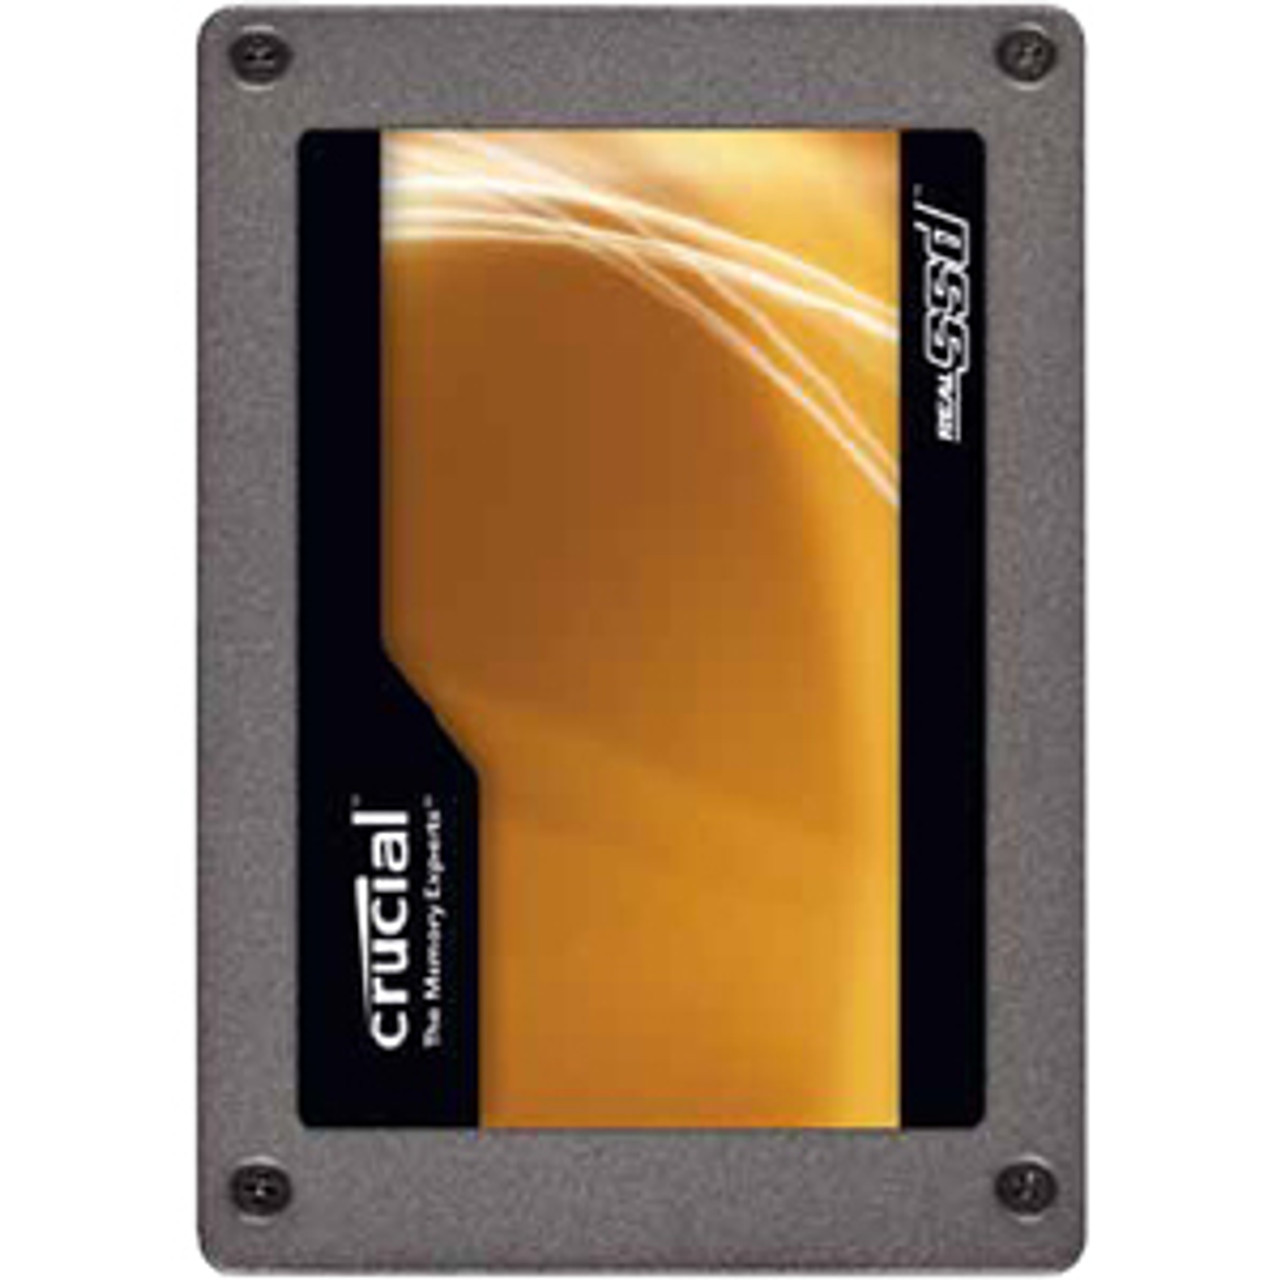 123655 Crucial RealSSD C300 64 GB Solid State Drive - -